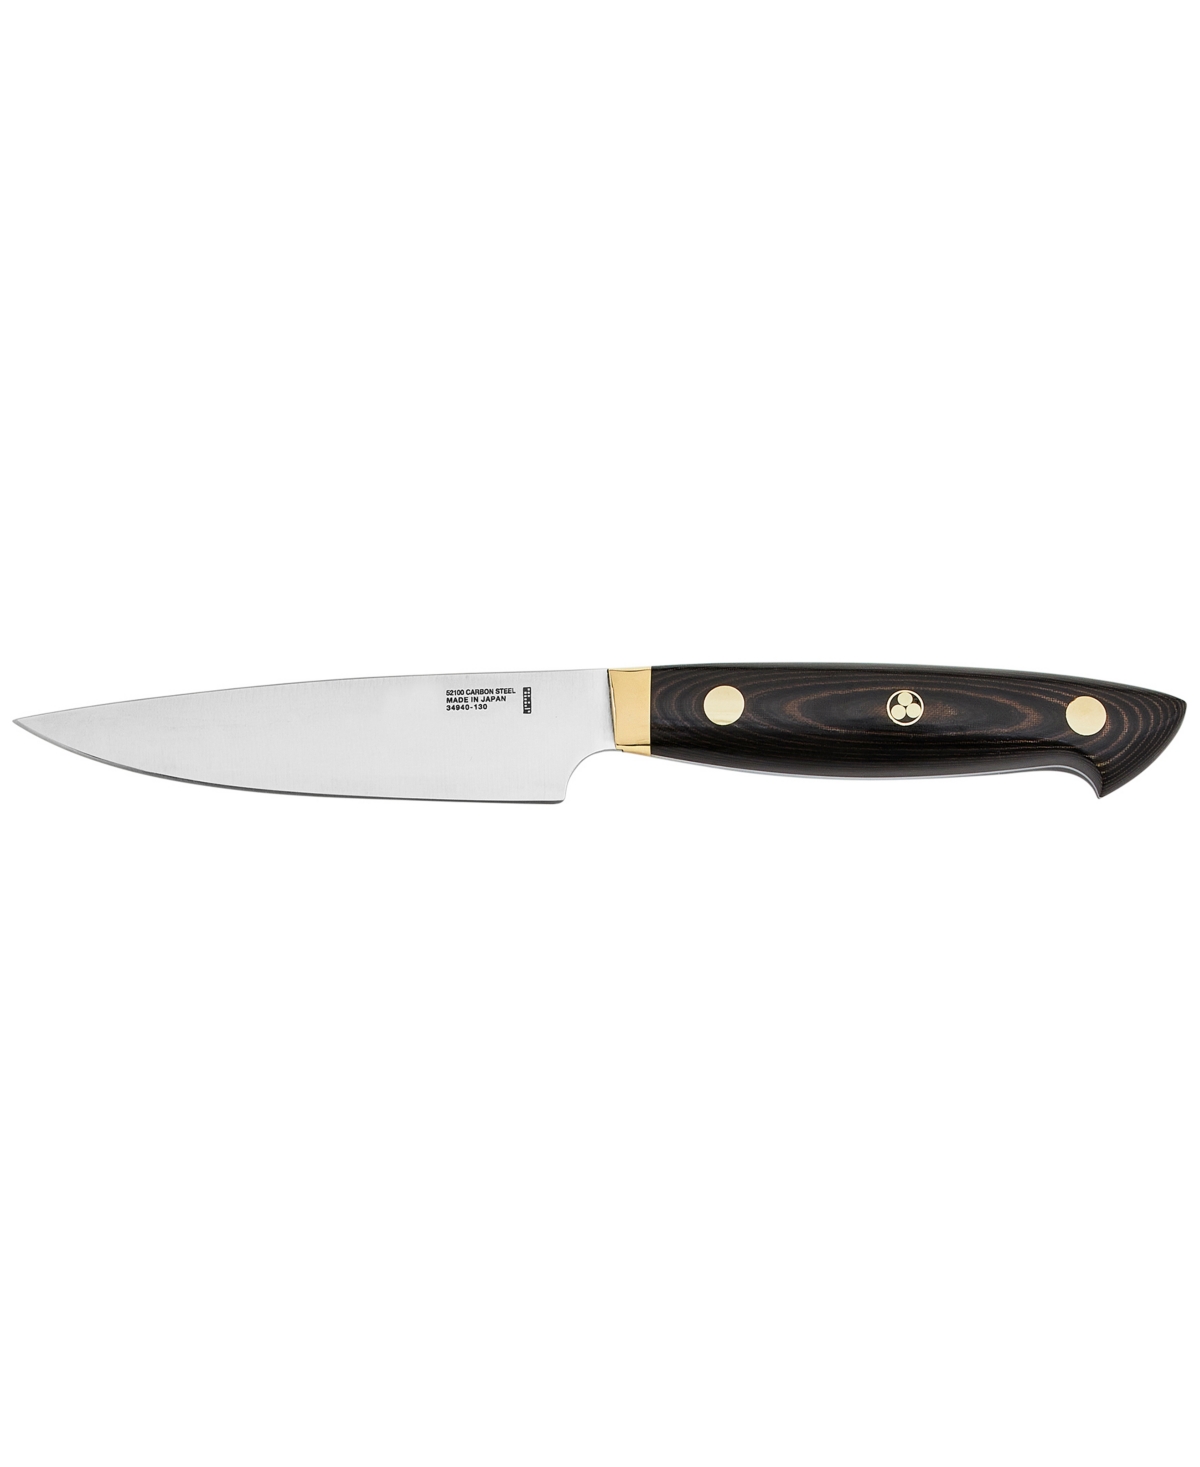 Zwilling Bob Kramer Carbon 2.0 Utility Knife, 5" In Brown And Silver-tone